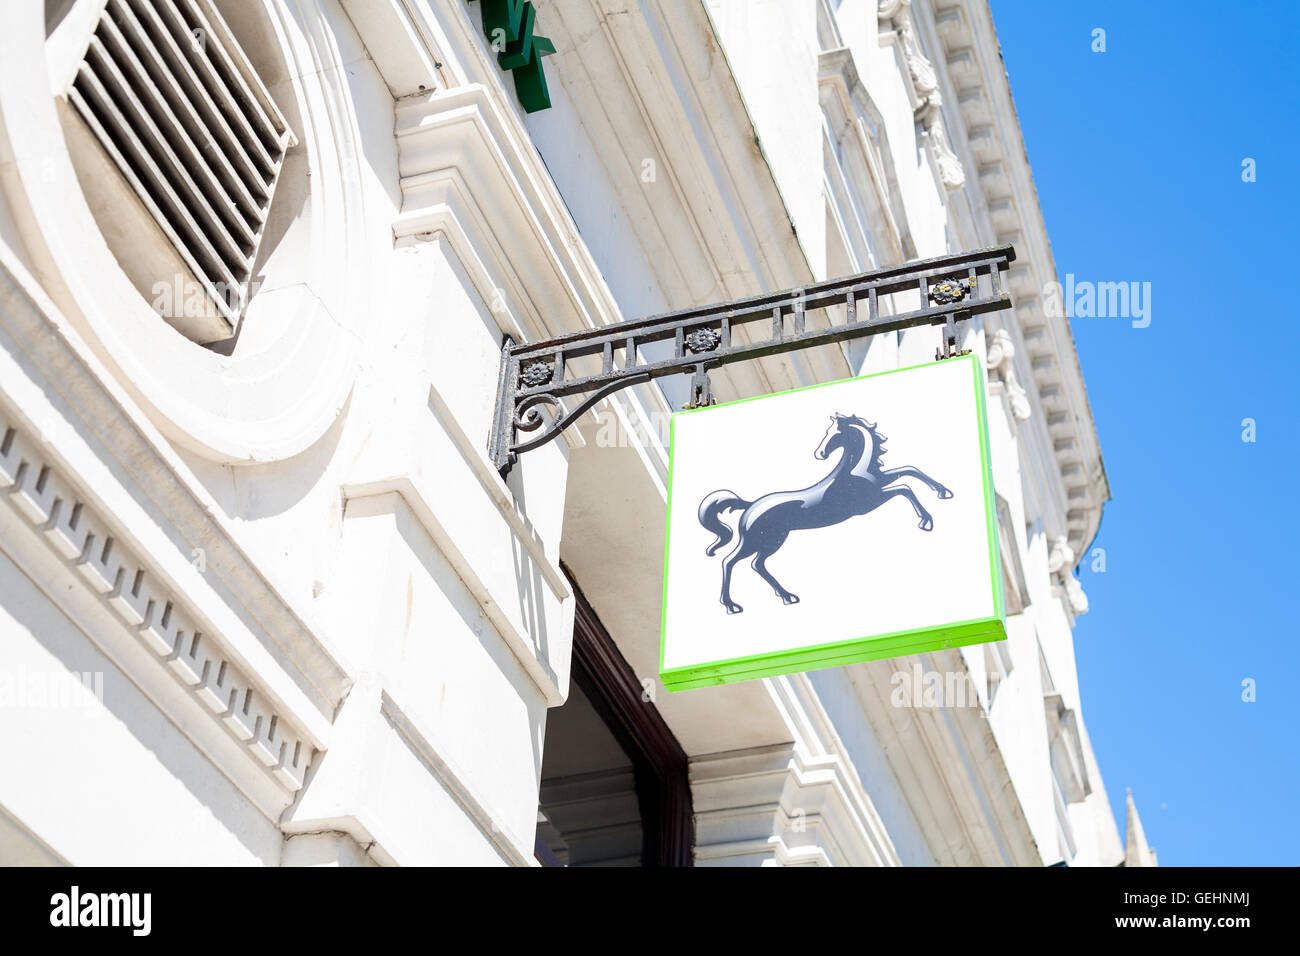 TRURO, CORNWALL, UK - JULY 17, 2016: Lloyds Bank Sign. Architectural detail of local branch of Lloyds Bank showing new branding. Stock Photo